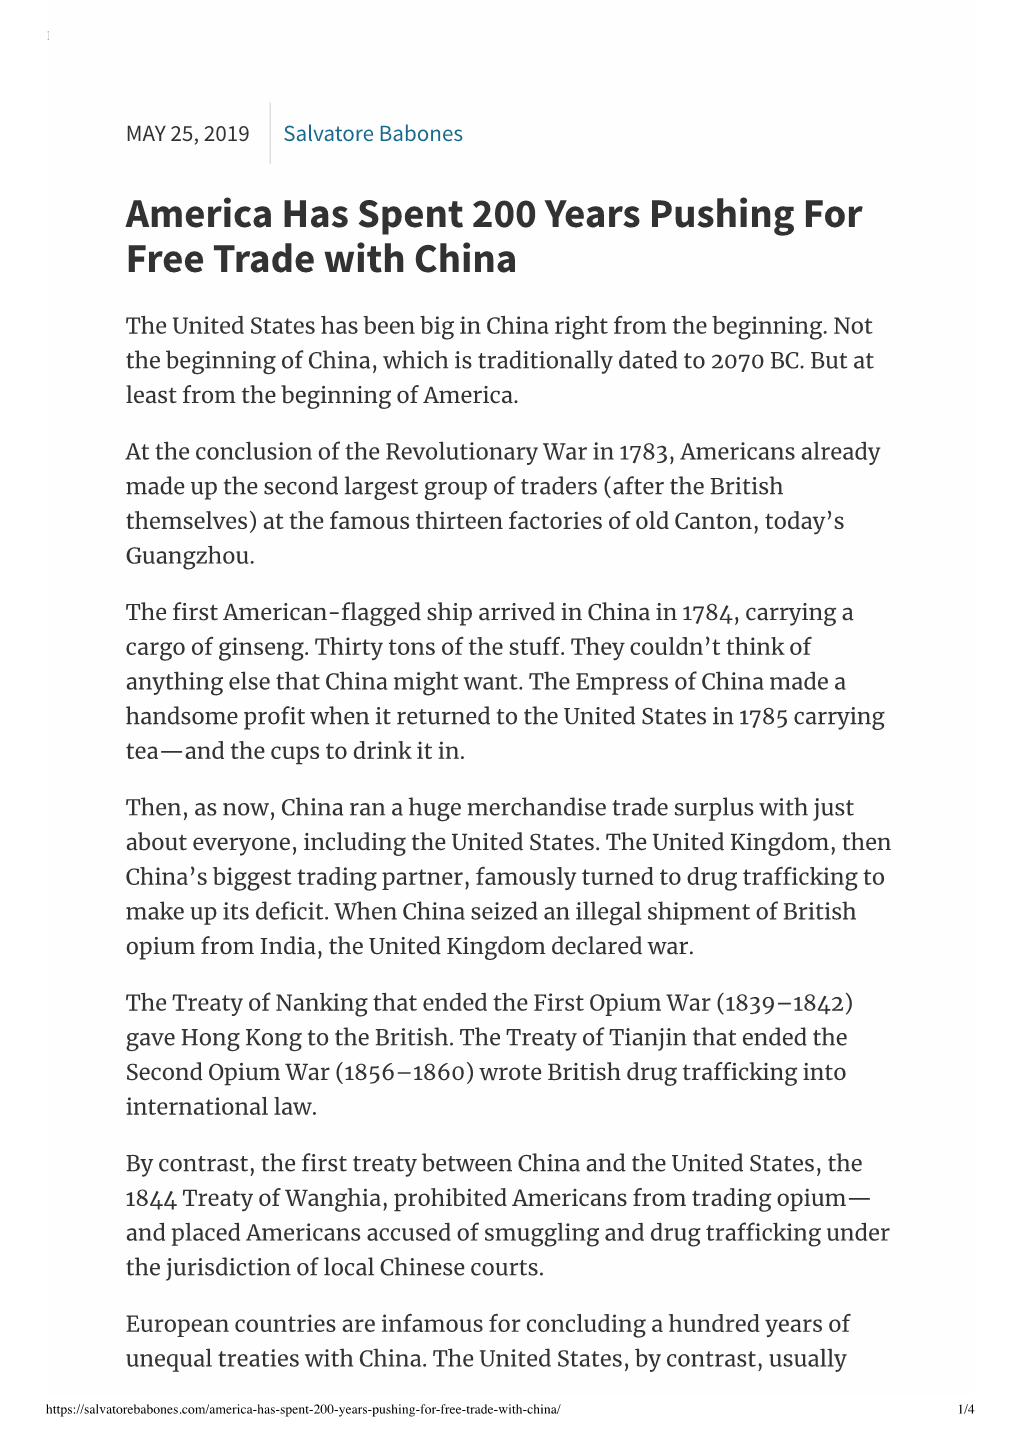 America Has Spent 200 Years Pushing For...E Trade with China | Salvatore Babones